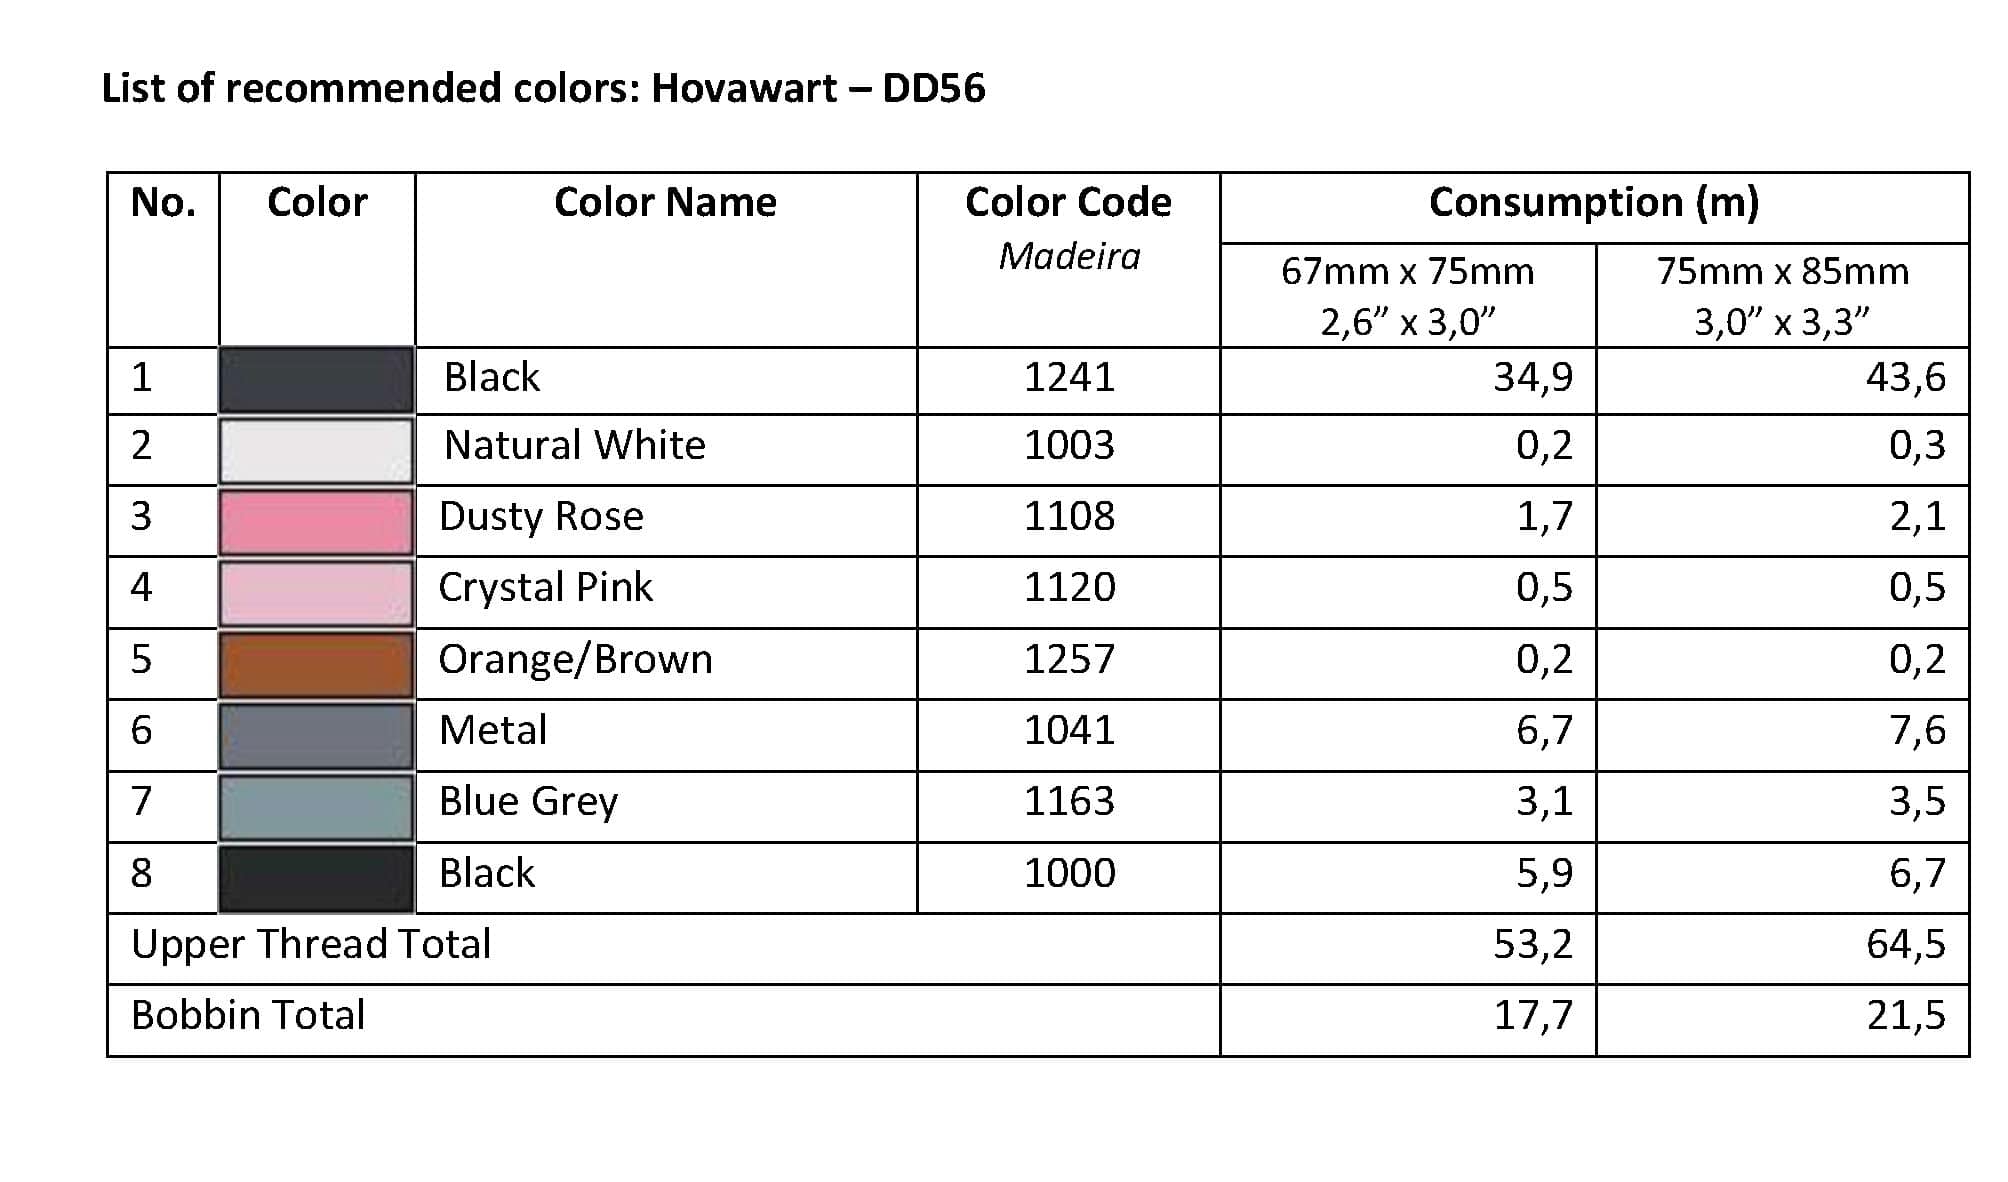 List of Recommended Colors - Hovawart DD56